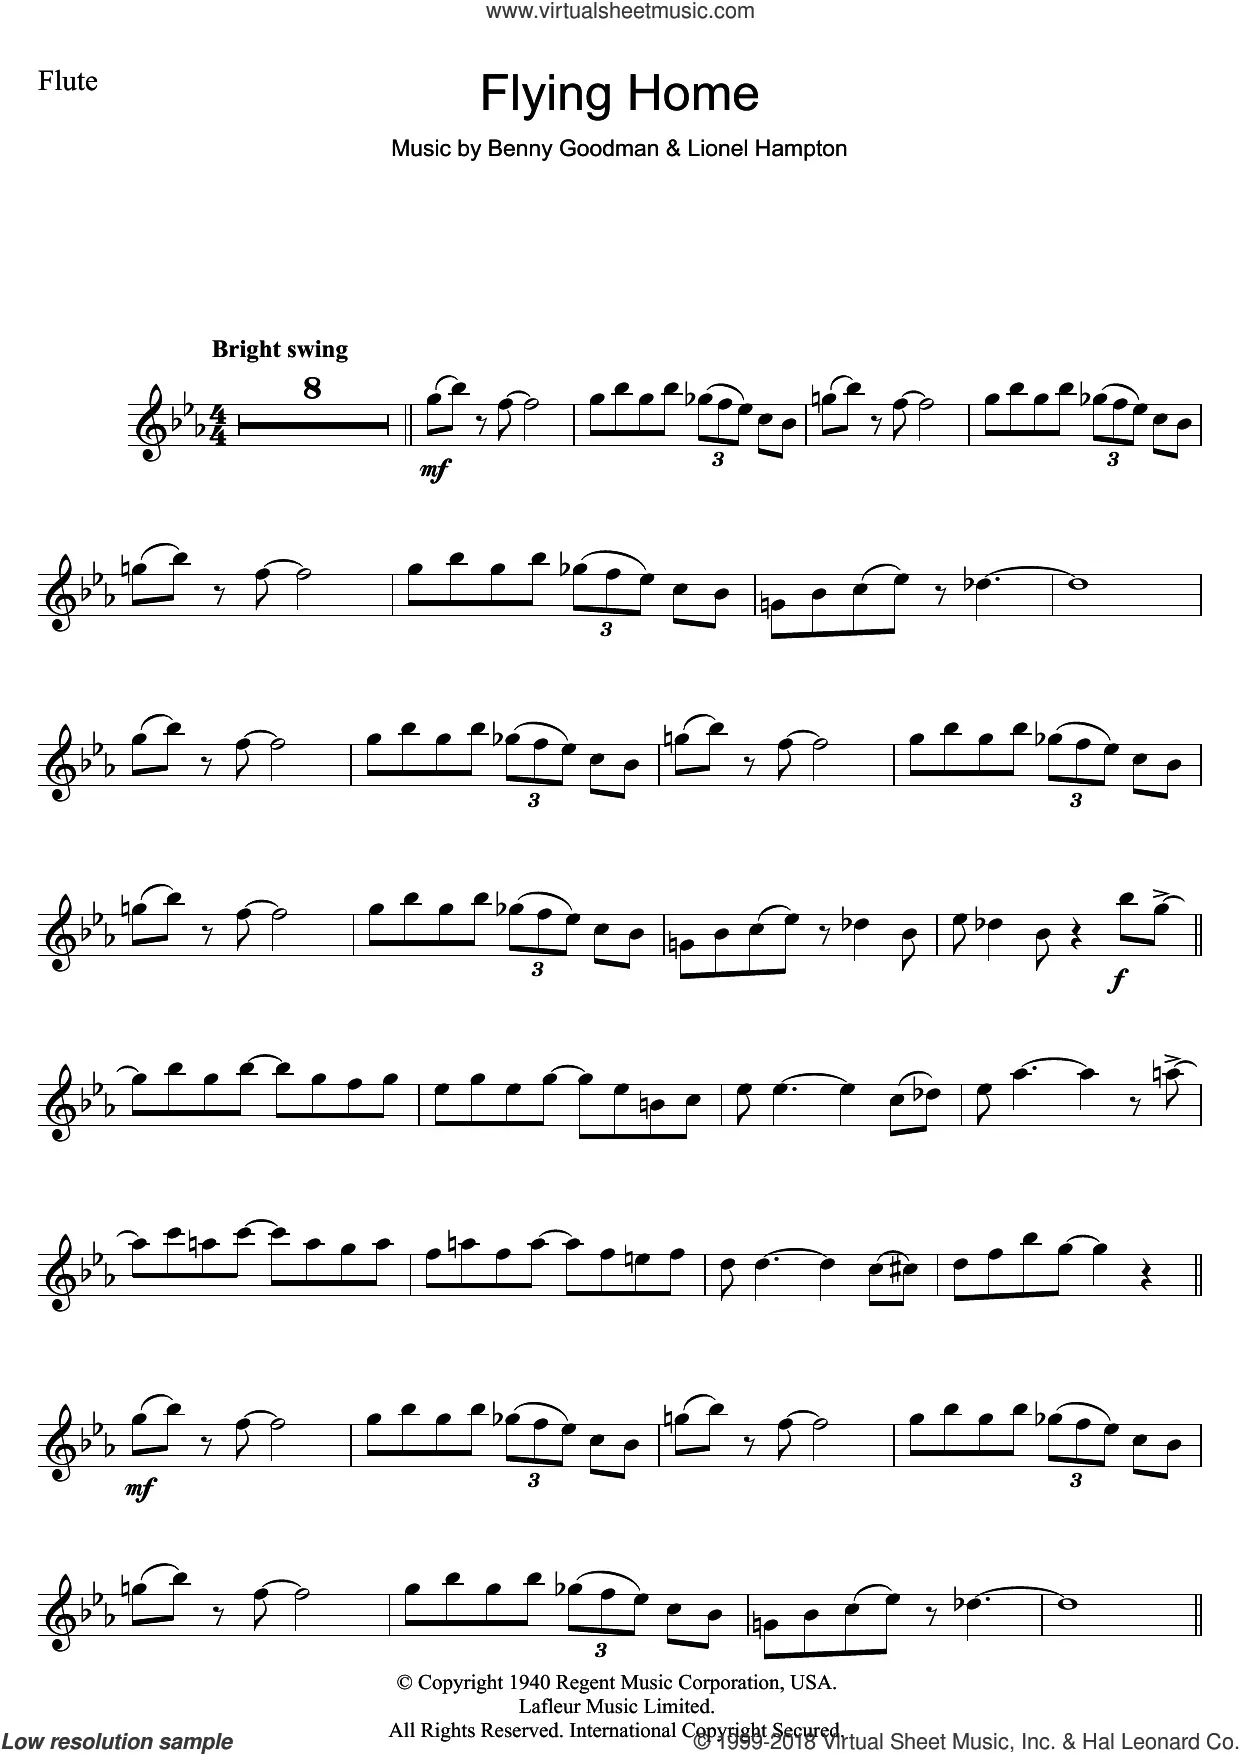 Lionel Hampton Sheet Music to download and print